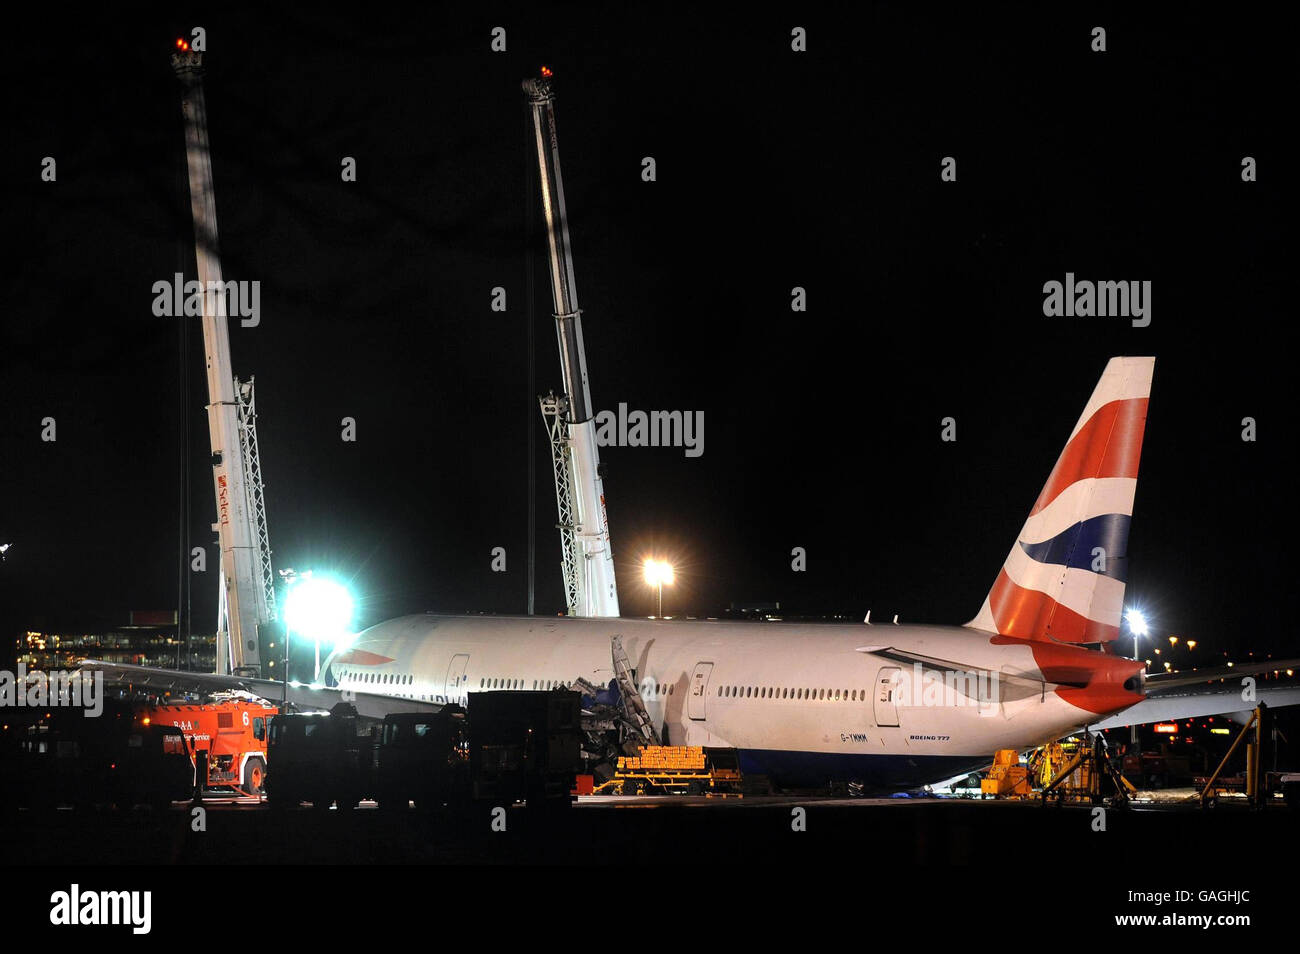 The British Airways Boeing 777 plane that crash landed at Heathrow yesterday afternoon, is held up off the ground by two giant cranes, this evening. Stock Photo